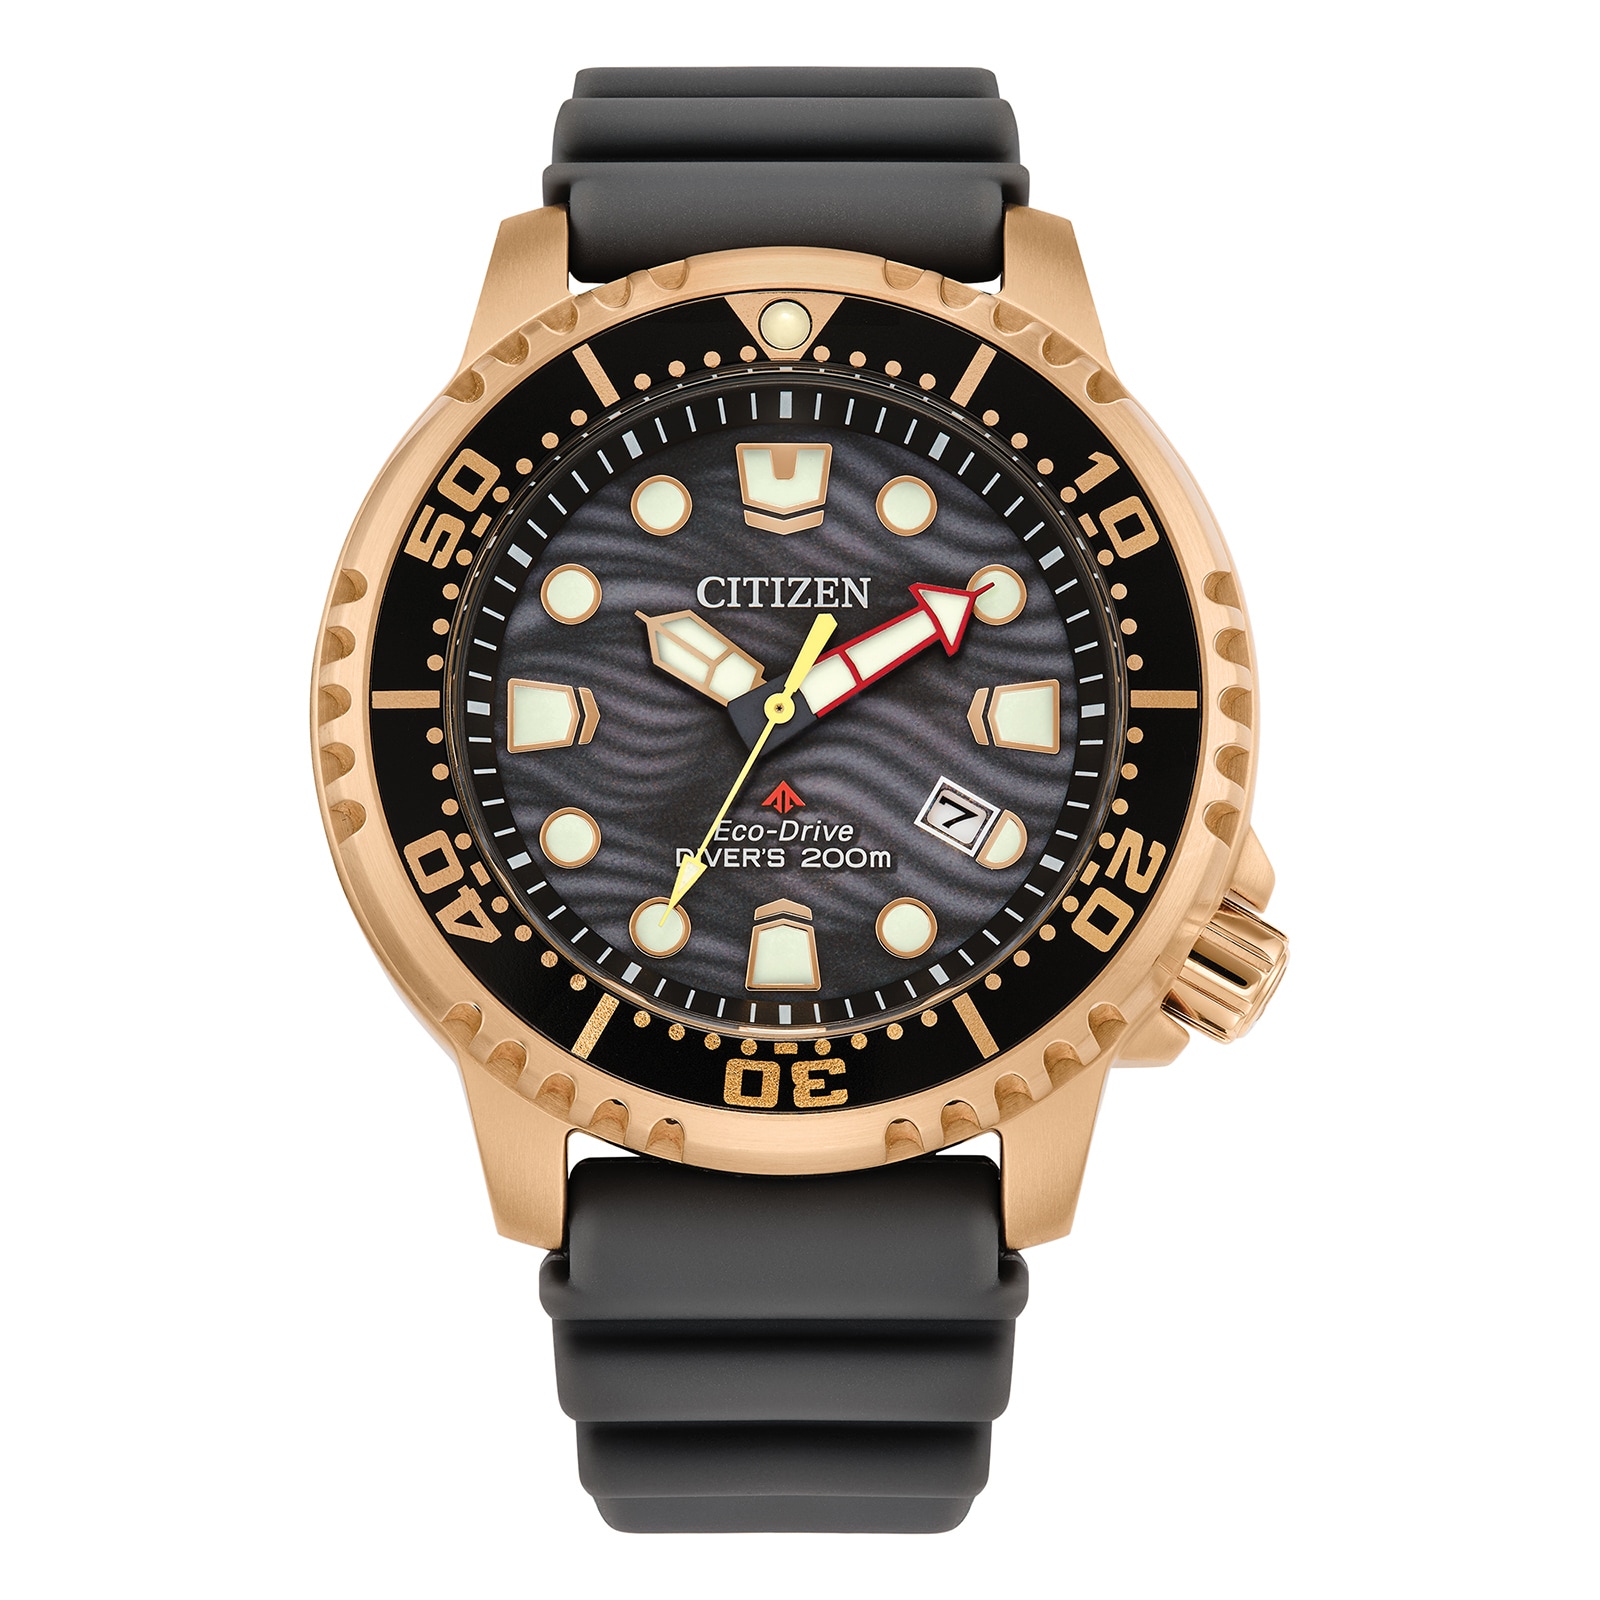 Promaster Diver 44mm Mens Watch - Black Rubber